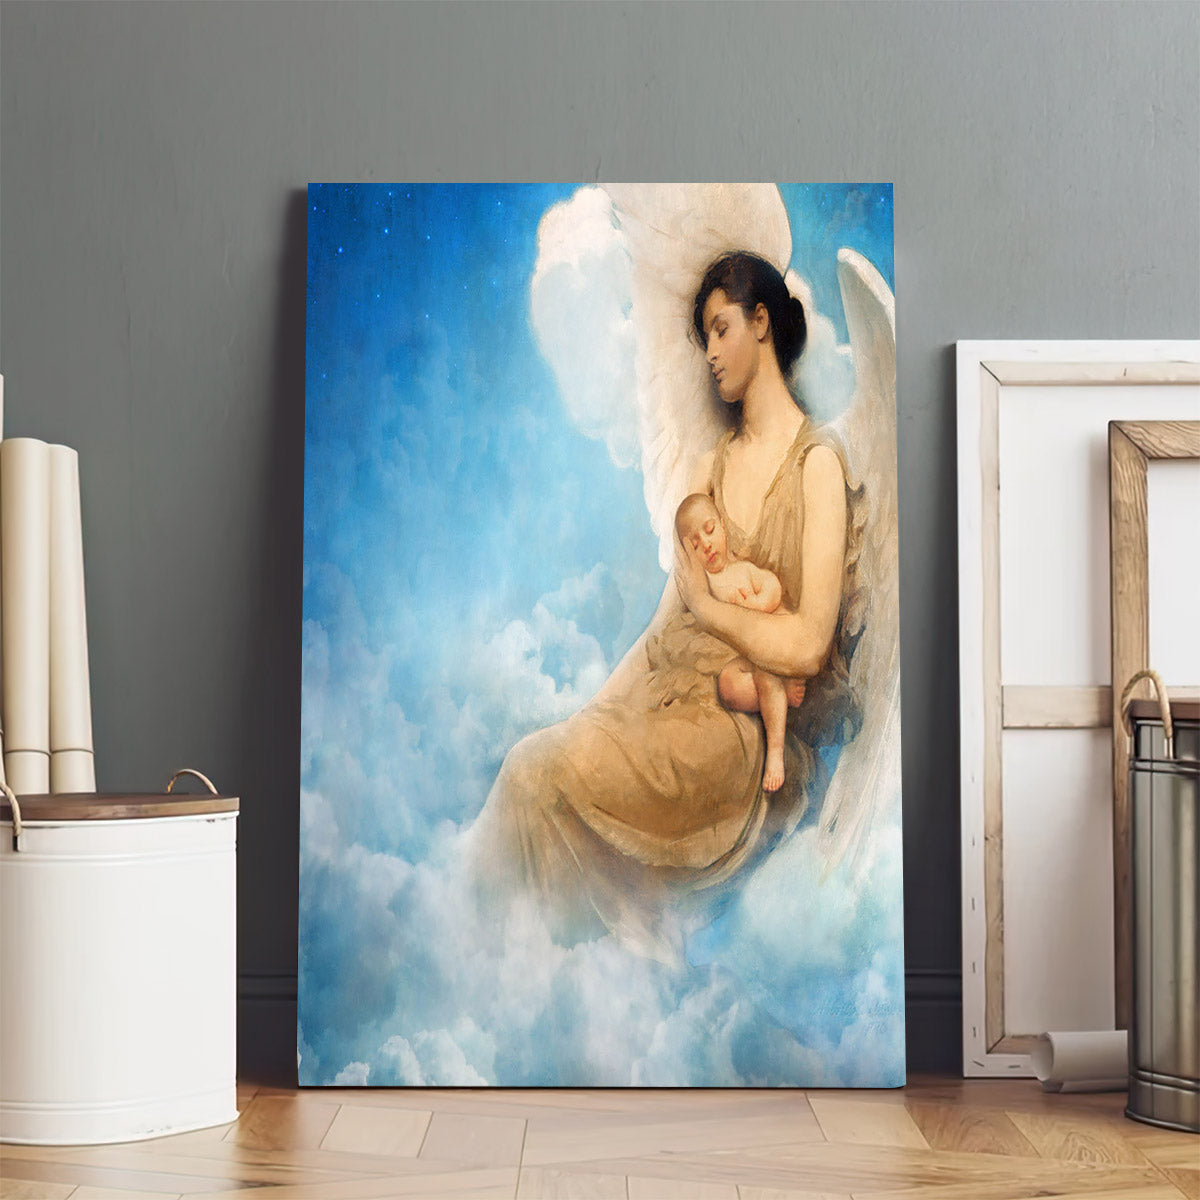 Heavenly Peace After Abbot Handerson Thayer - Canvas Pictures - Jesus Canvas Art - Christian Wall Art